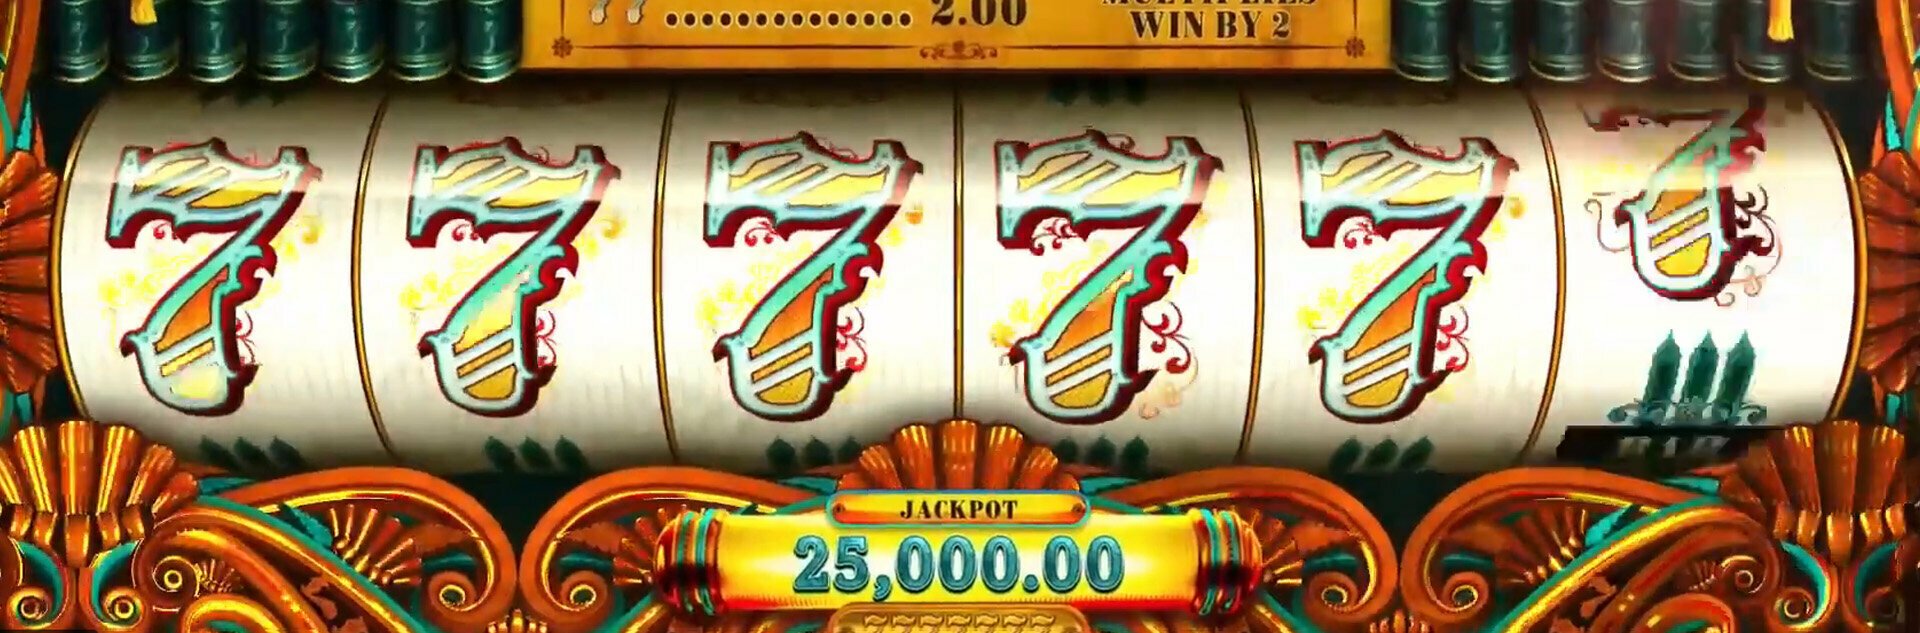 Seven 7's Free Spins